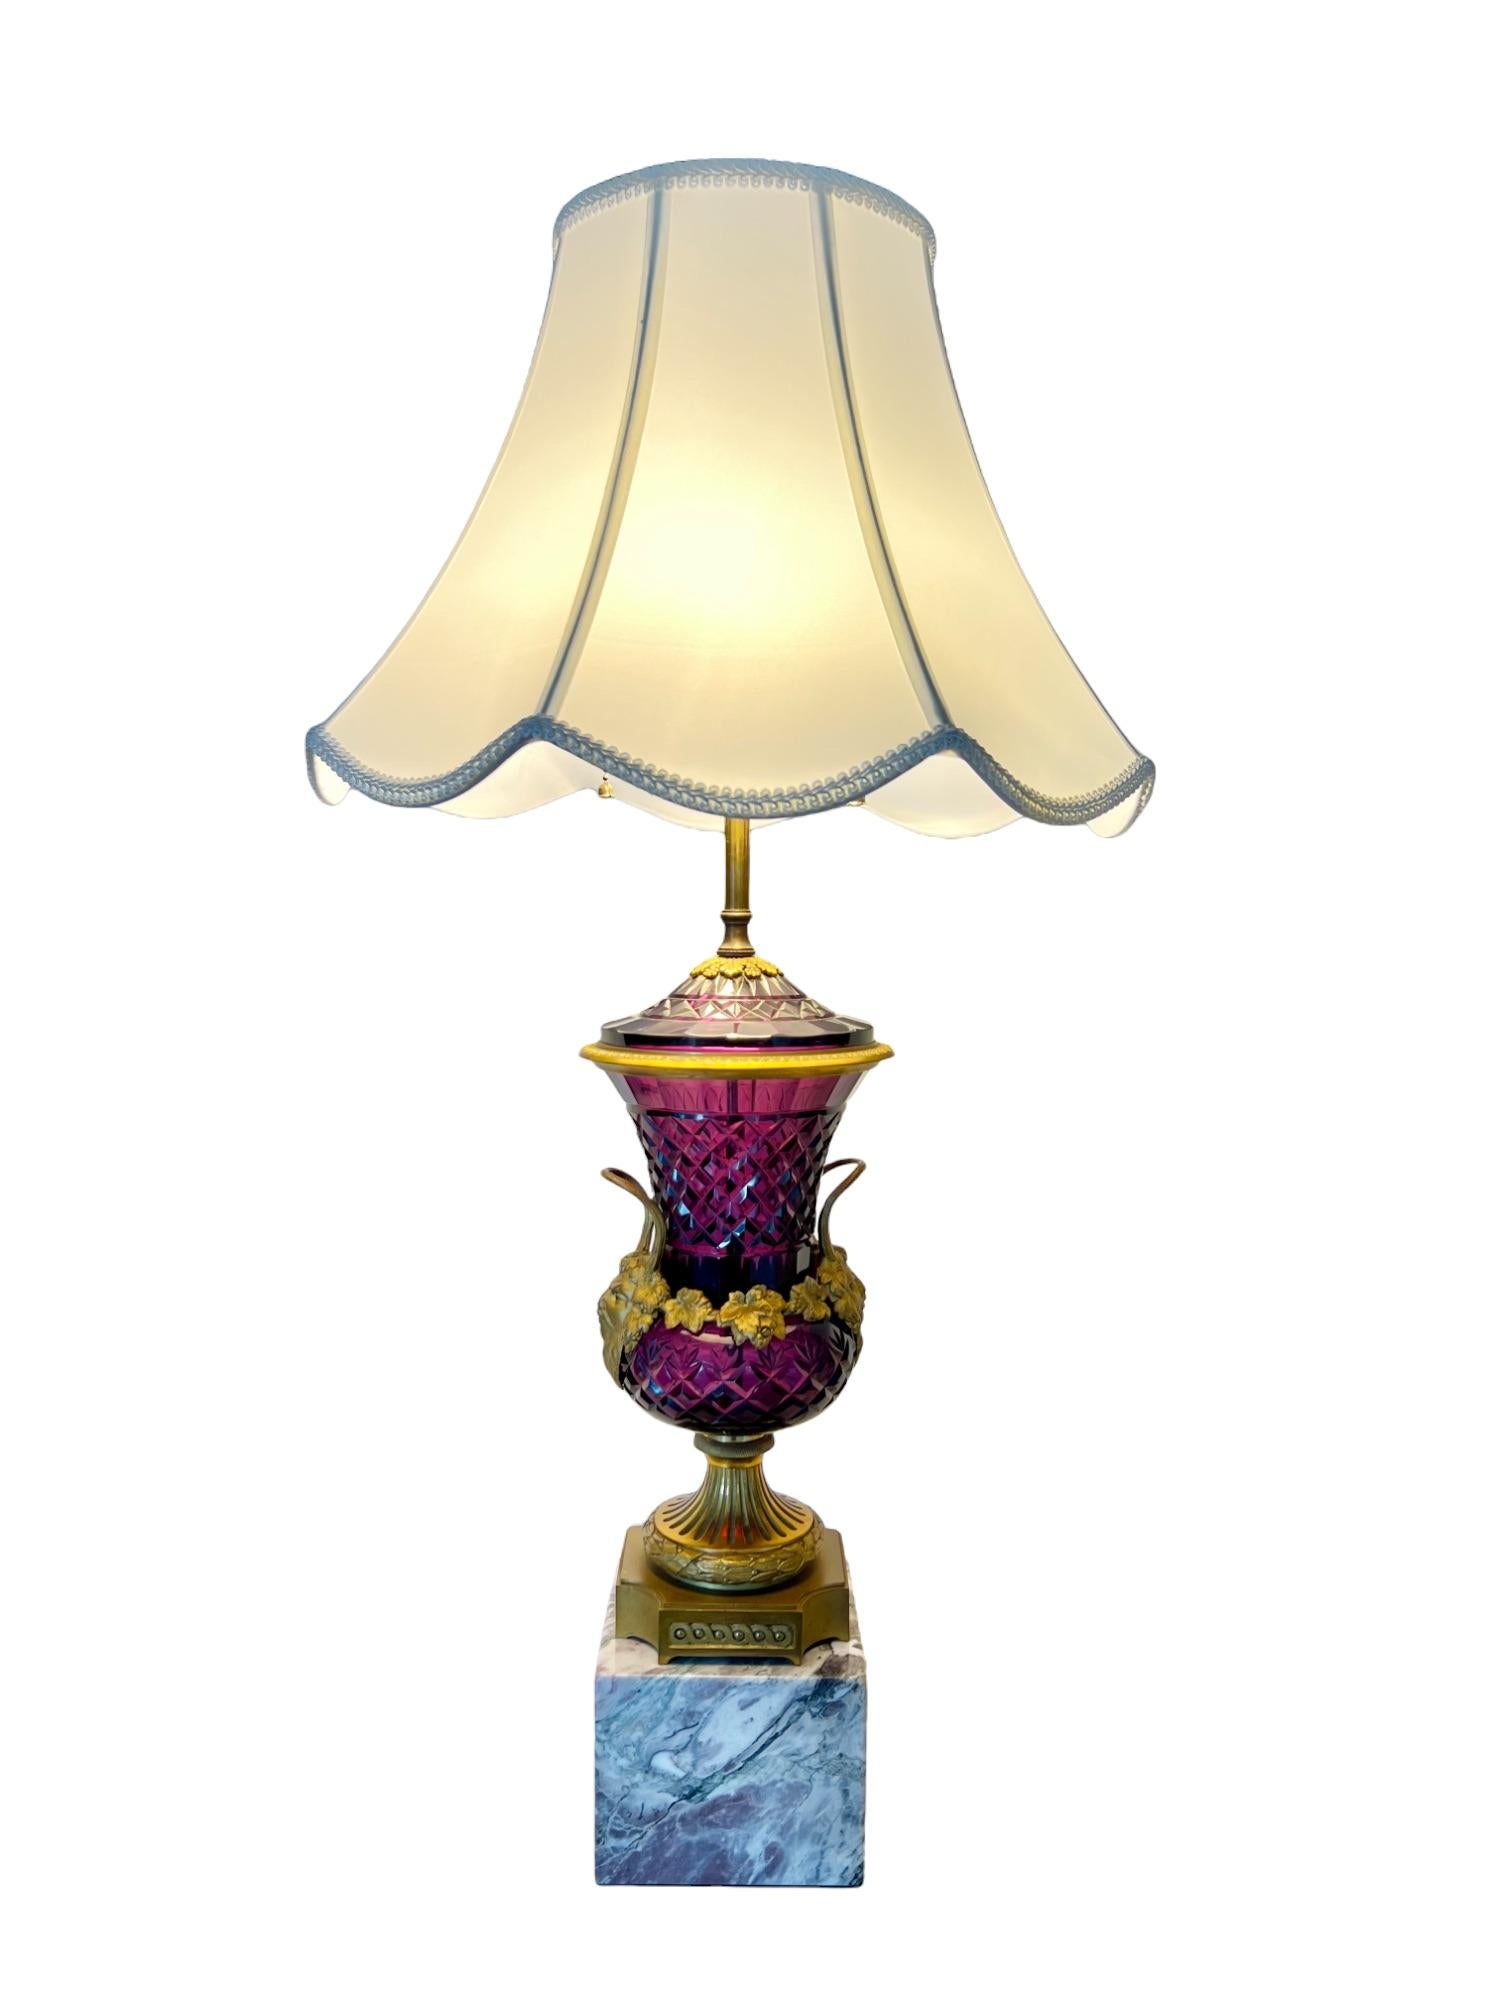 Faceted Austrian Ormolu Mounted Amethyst Glass Campana Urn Lamp, Late 19th C For Sale